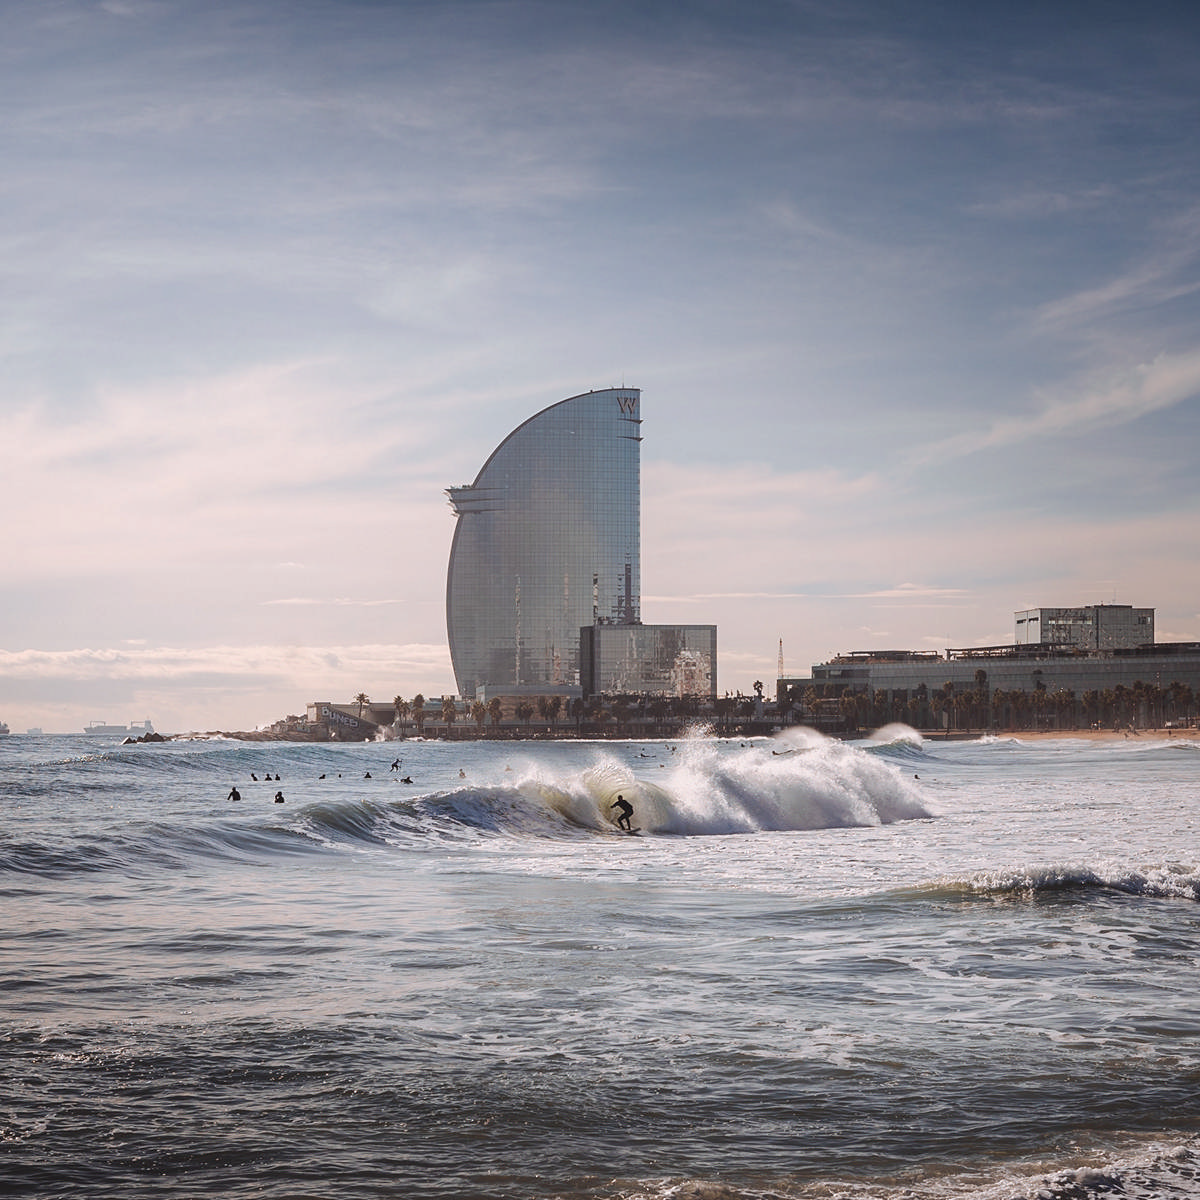 Barcelona architecture photography workshop and photo tour in Spain